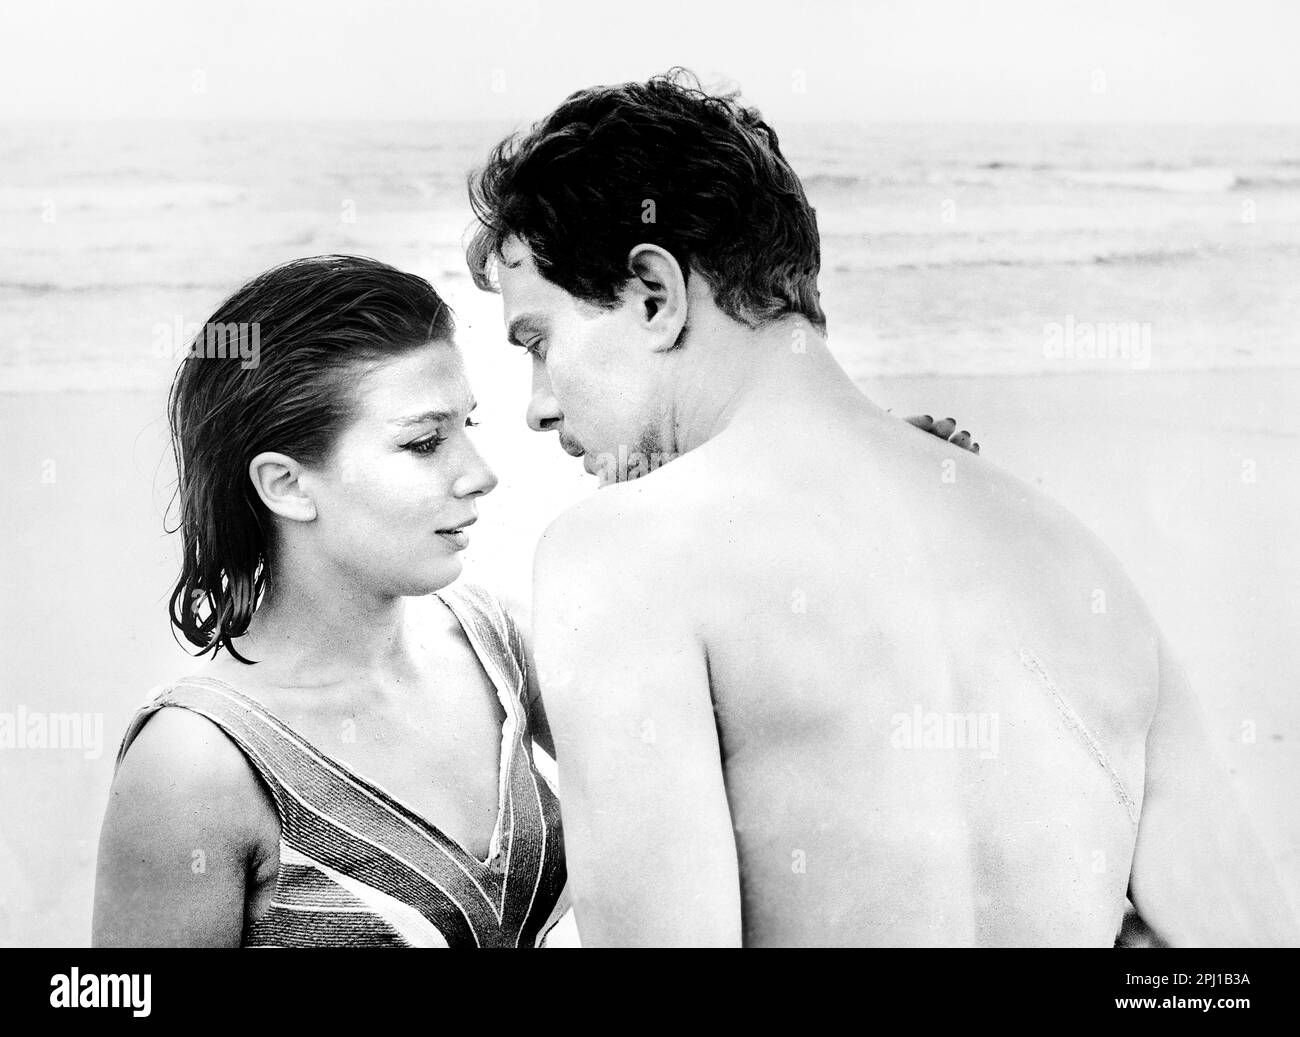 Graciela Borges, Alfredo Alcon, on-set of the Argentine Film, 'Summerskin', Spanish title: Piel de verano, directed and produced by Leopoldo Torre Nilsson, 1961 Stock Photo